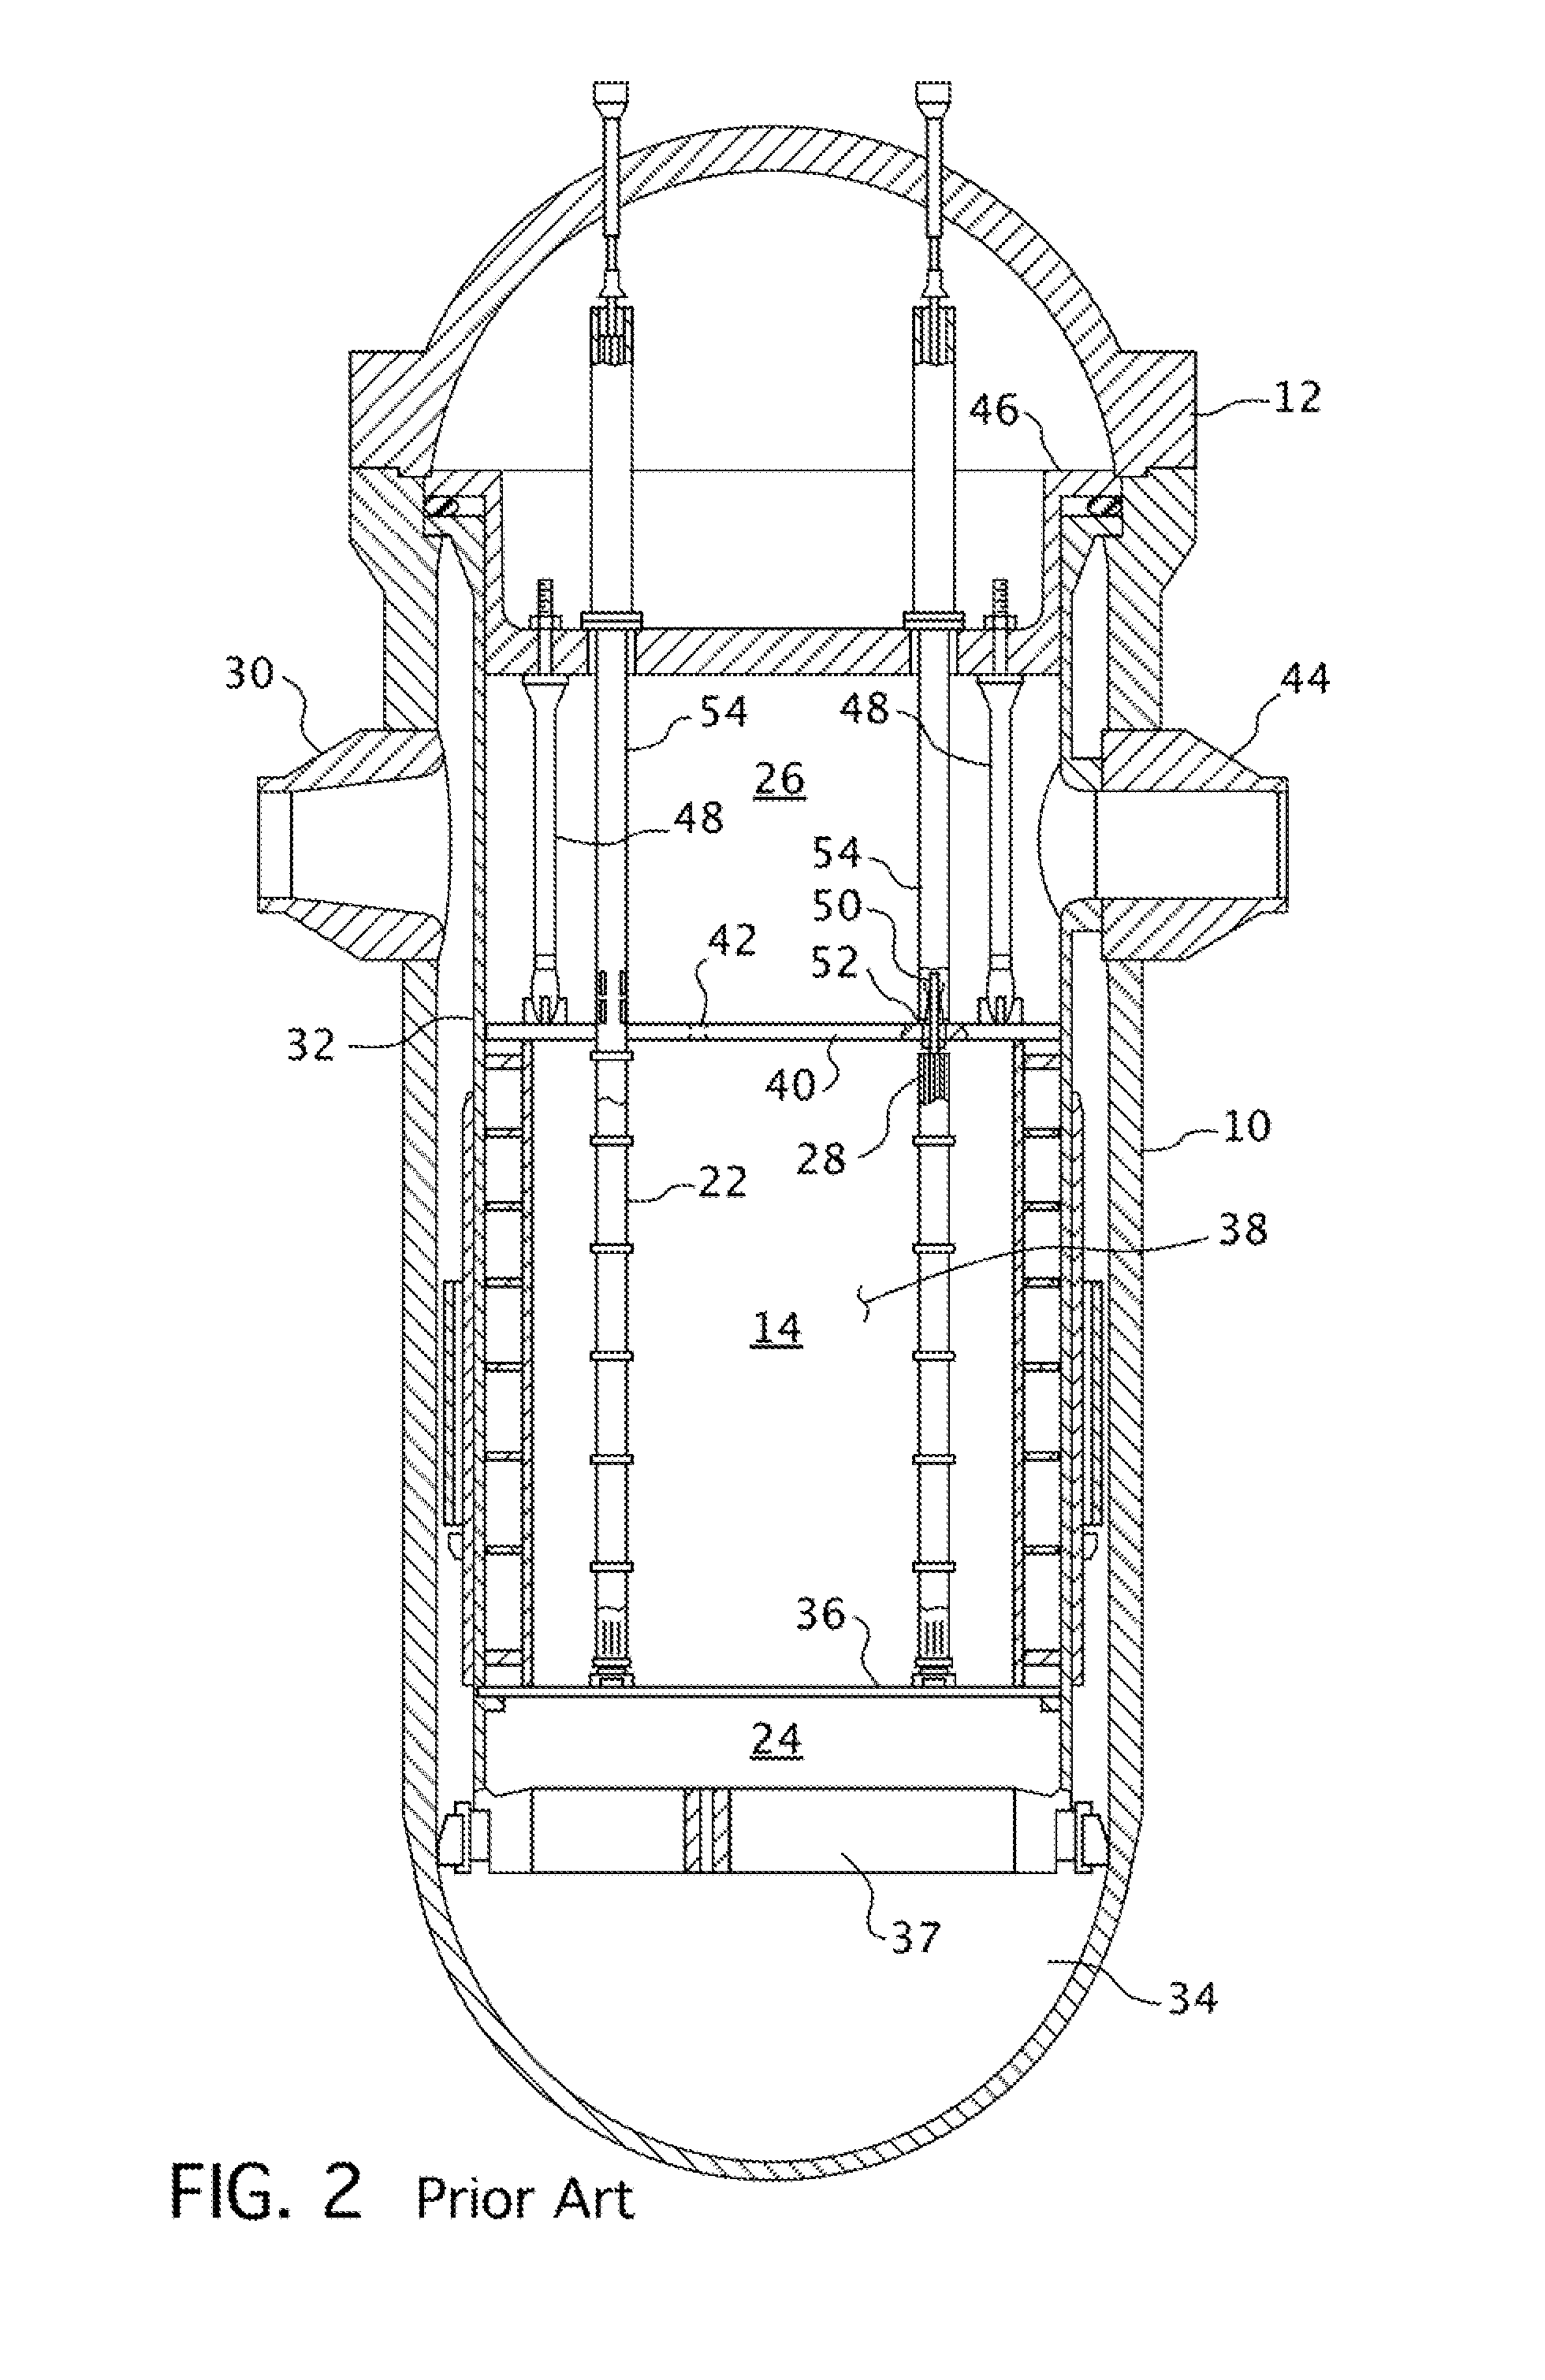 Passive system for cooling the core of a nuclear reactor